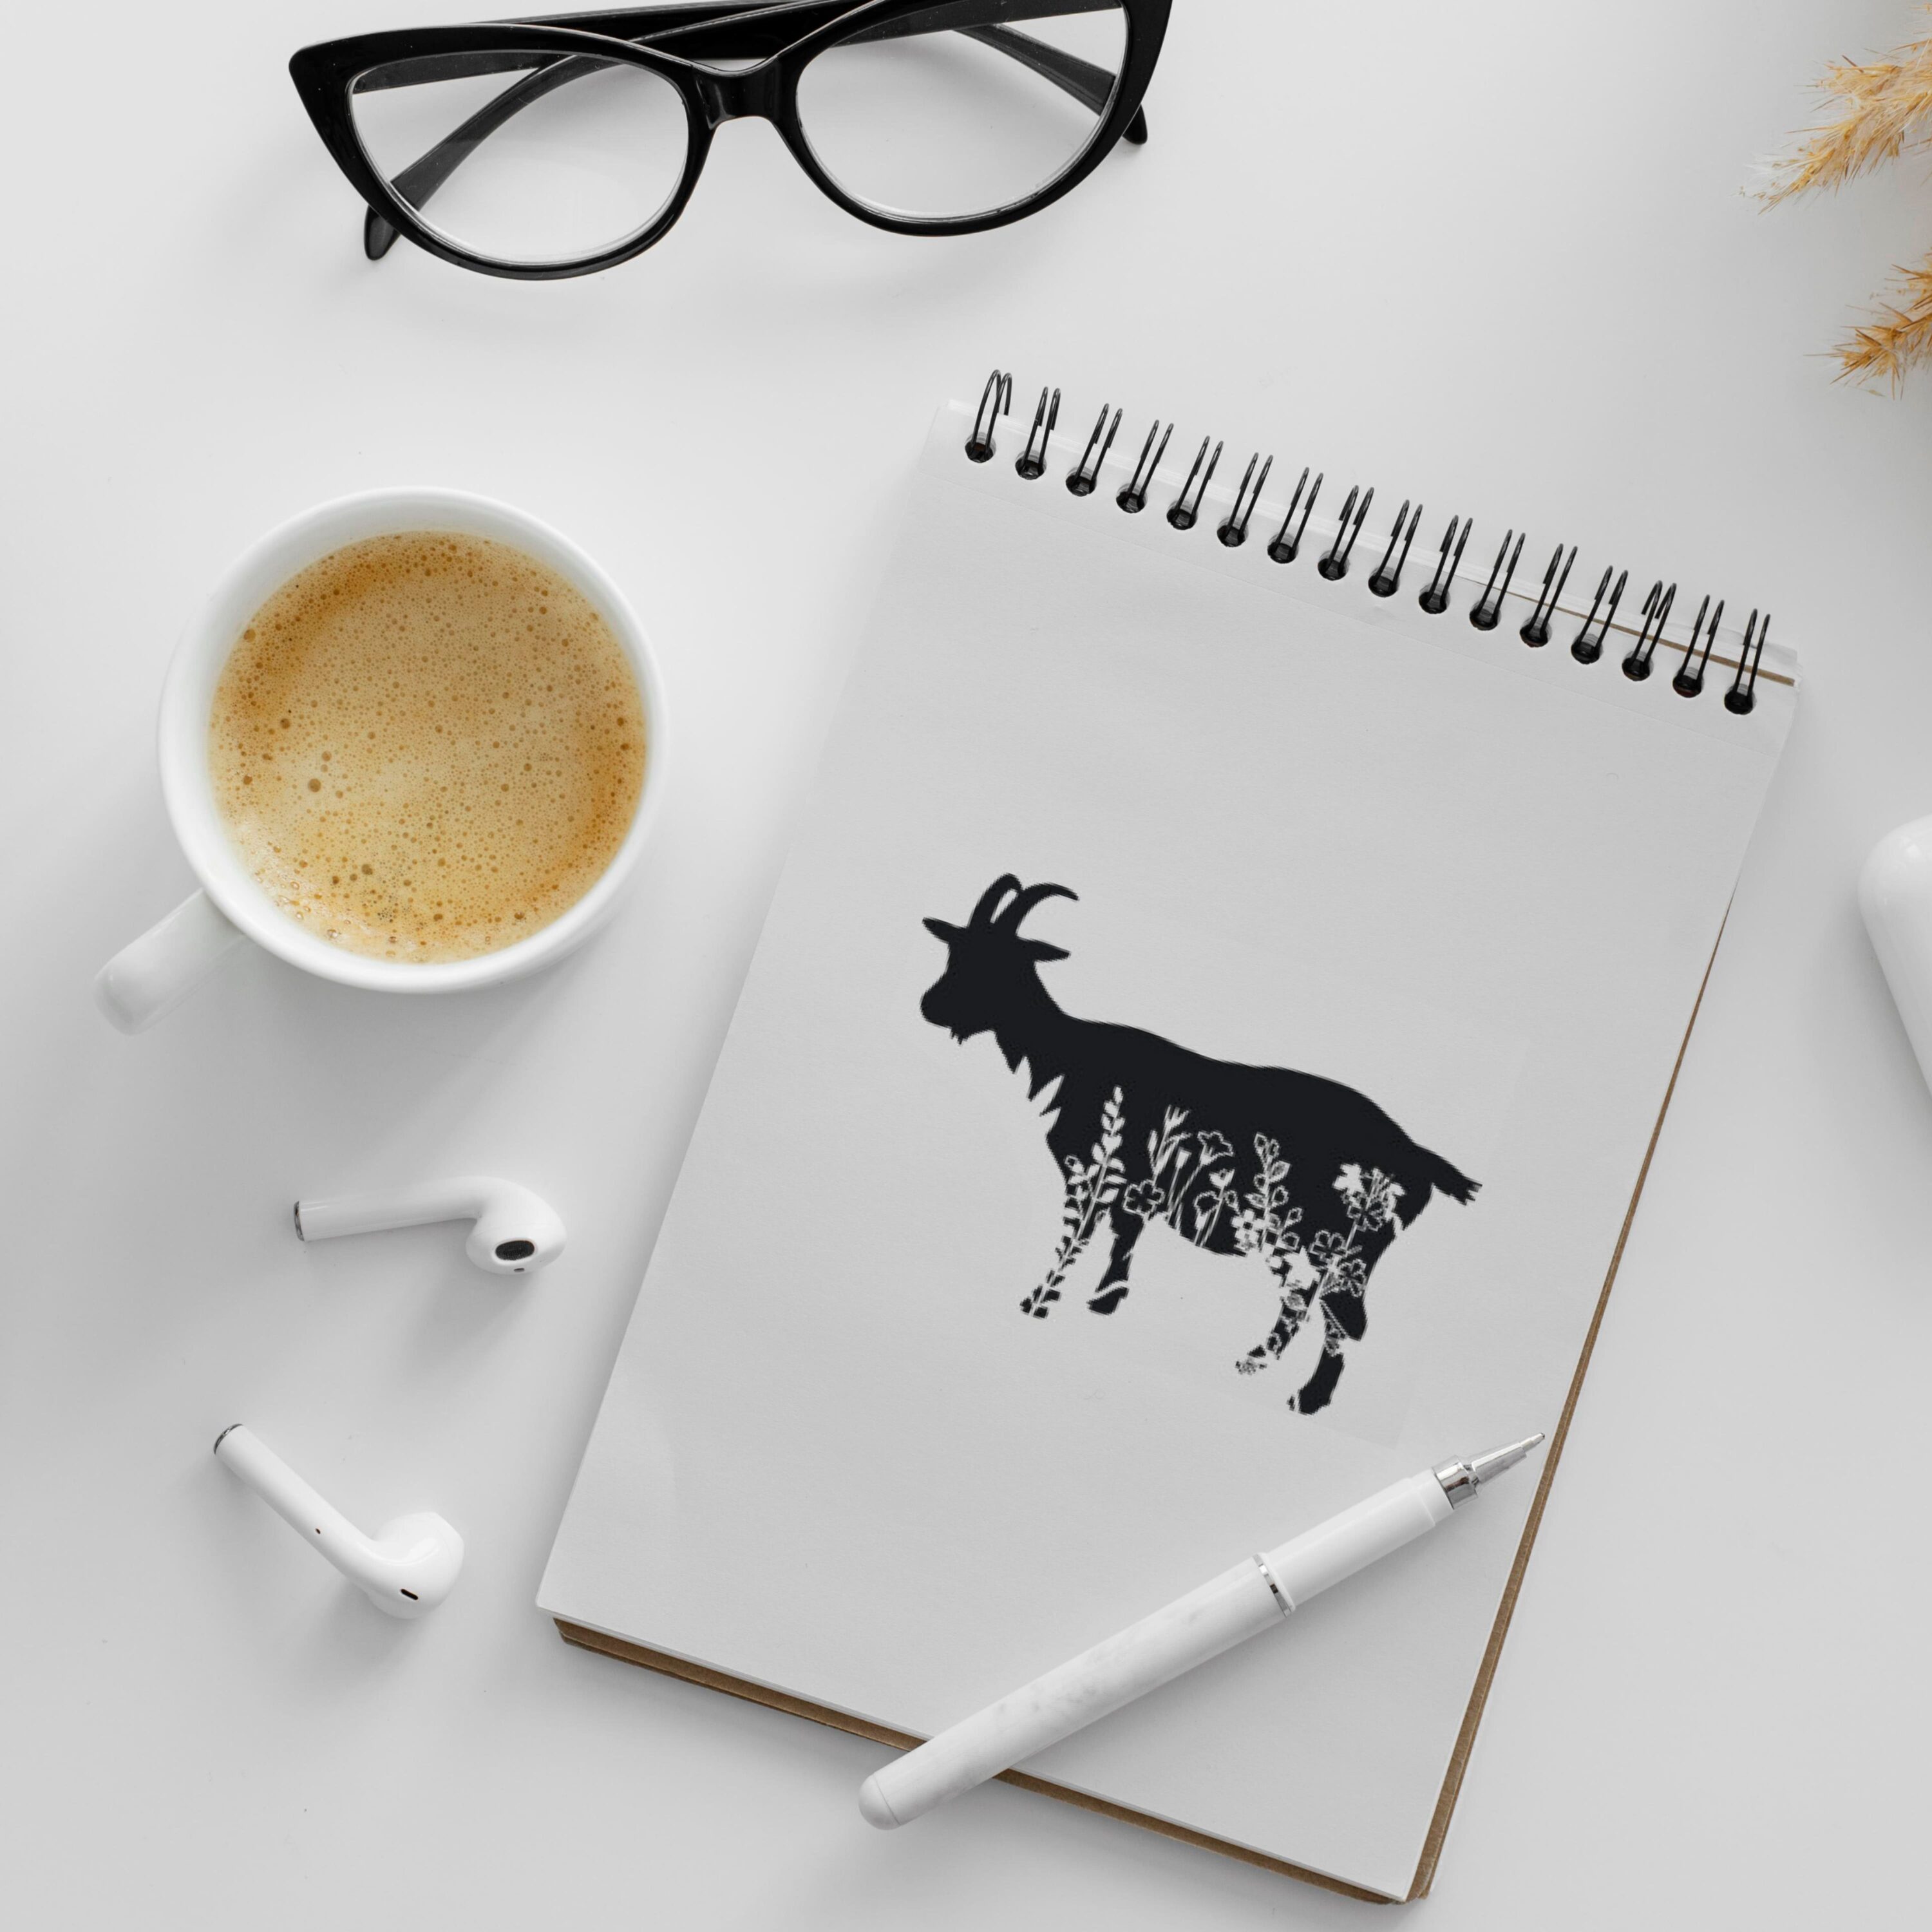 Notebook with a goat drawn on it next to a cup of coffee.